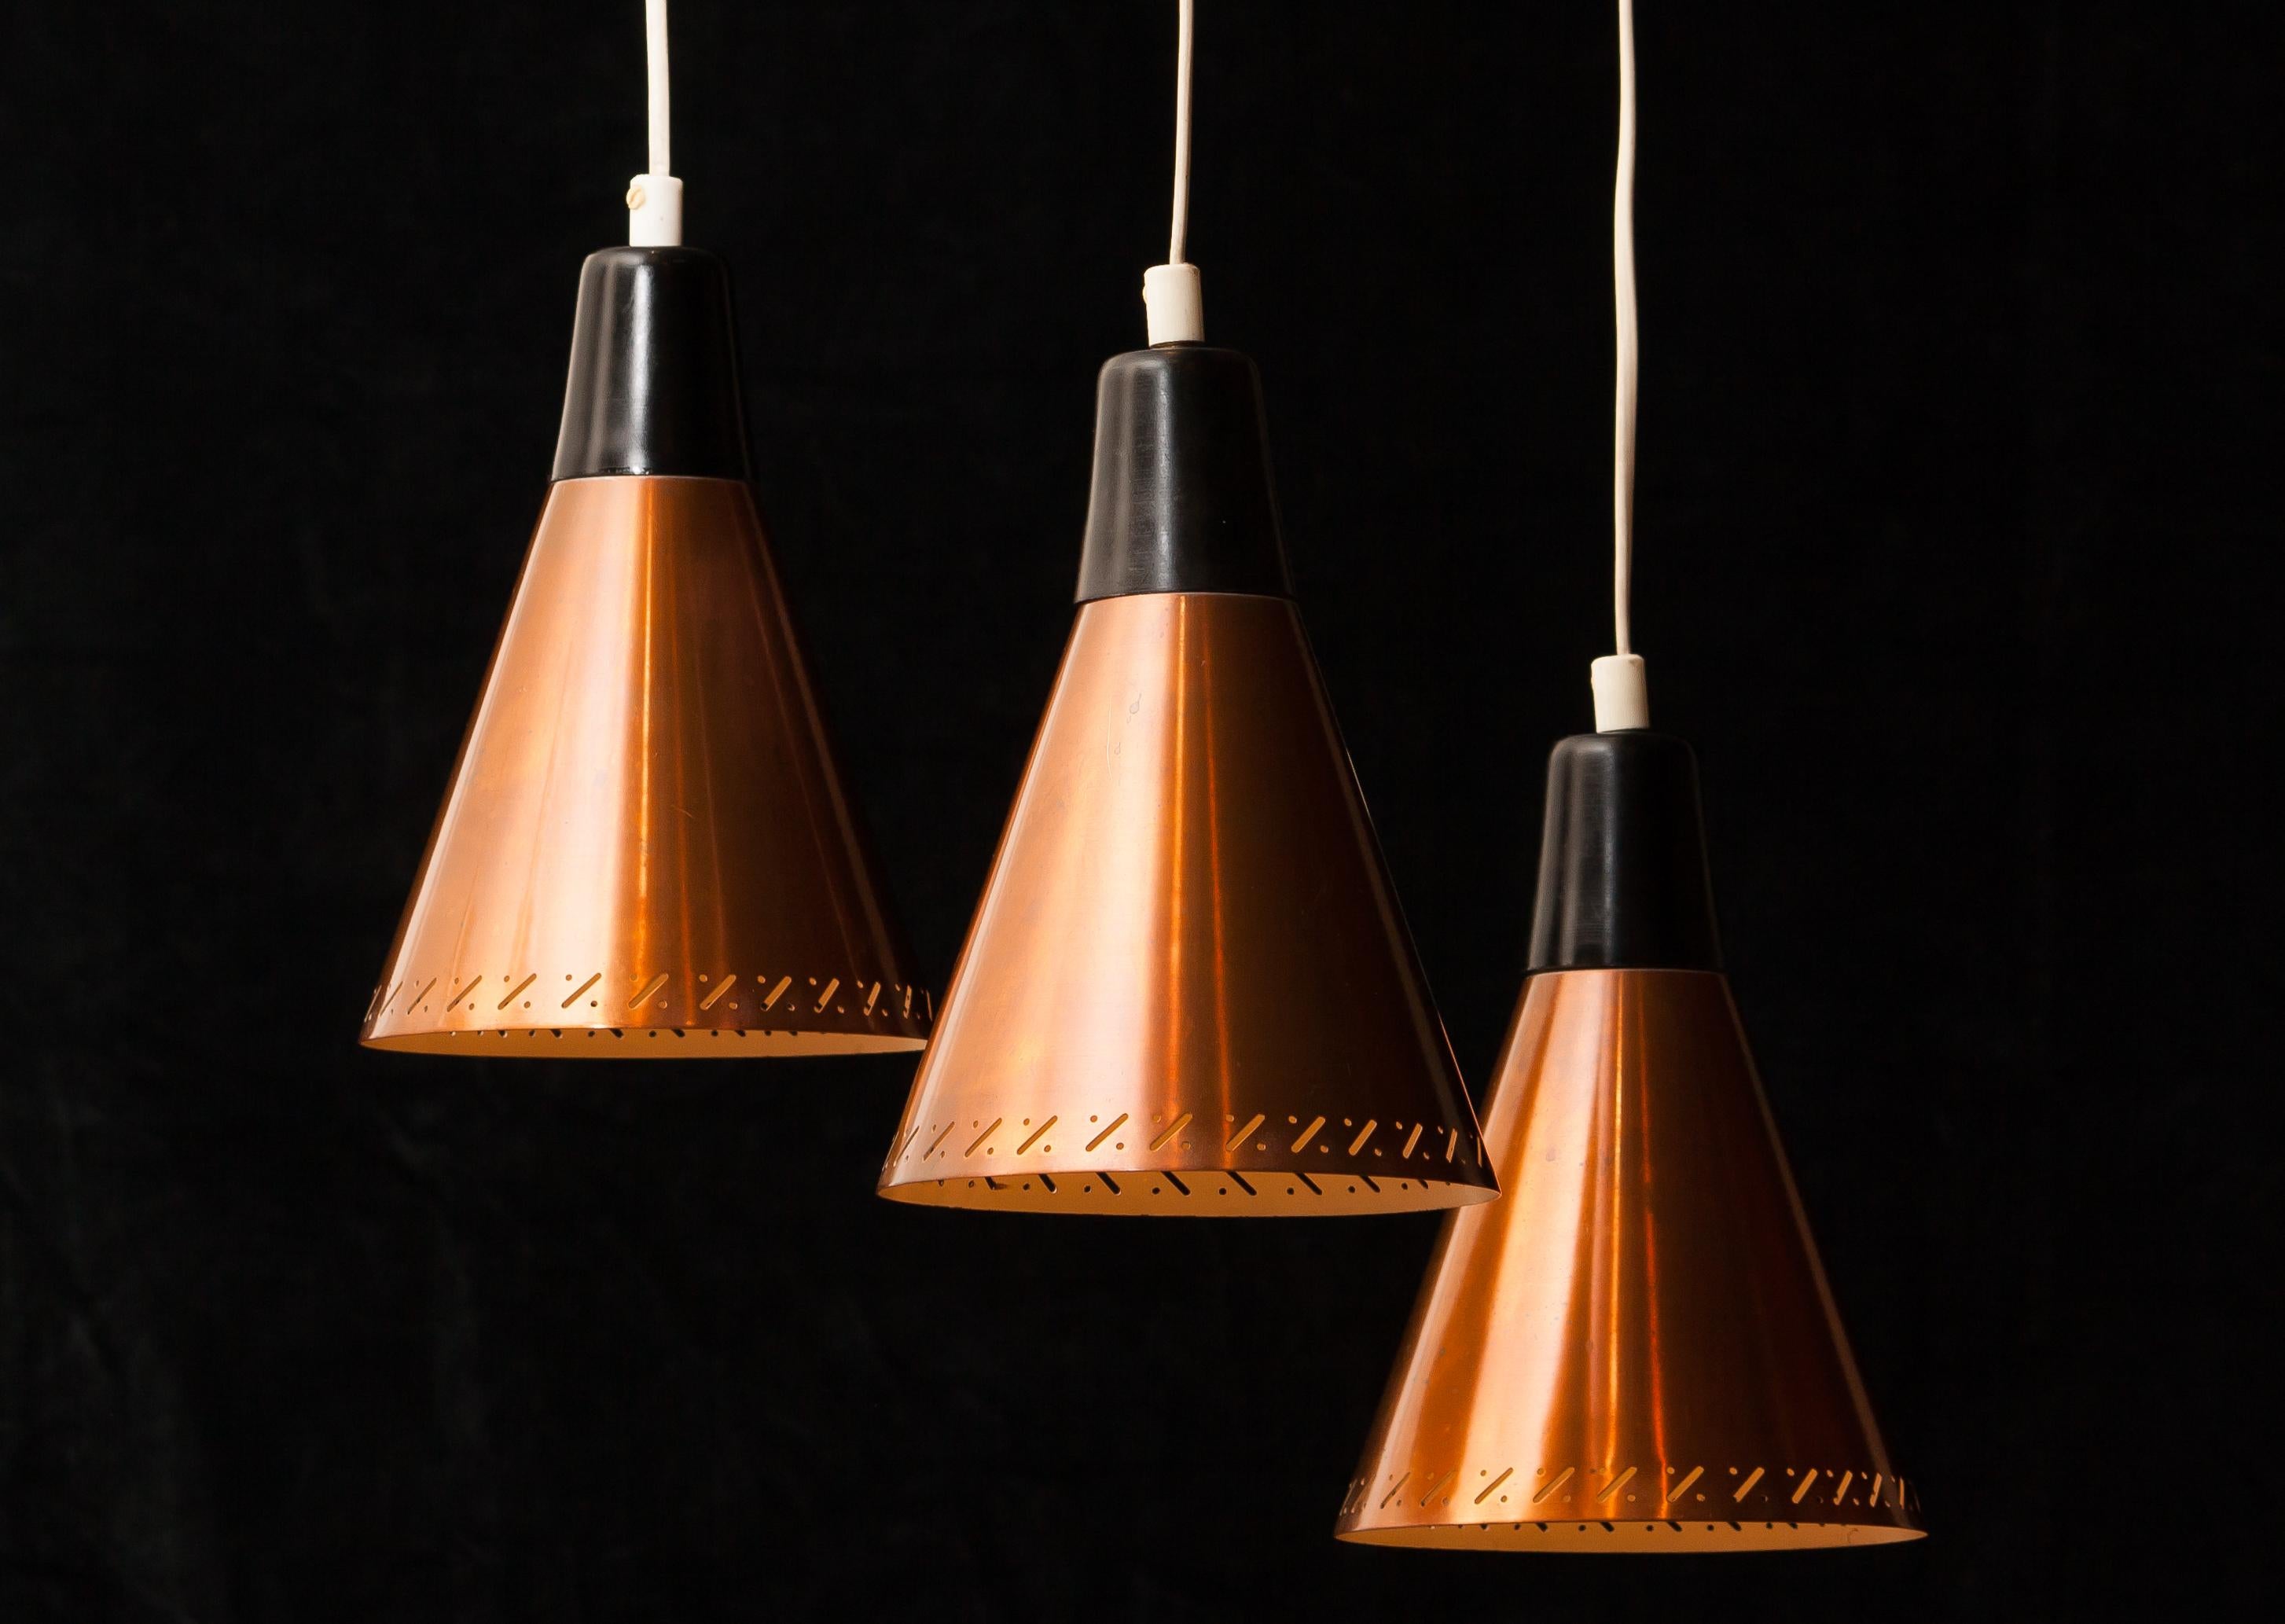 Beautiful lamp designed by Hans-Agne Jakobsson, Sweden.
This pendant is made of three perforated copper shades with brass details.
It is adjustable in height.
The lamp is in a very nice condition.
Period 1950s.
Dimensions: H.117 cm, ø.45.